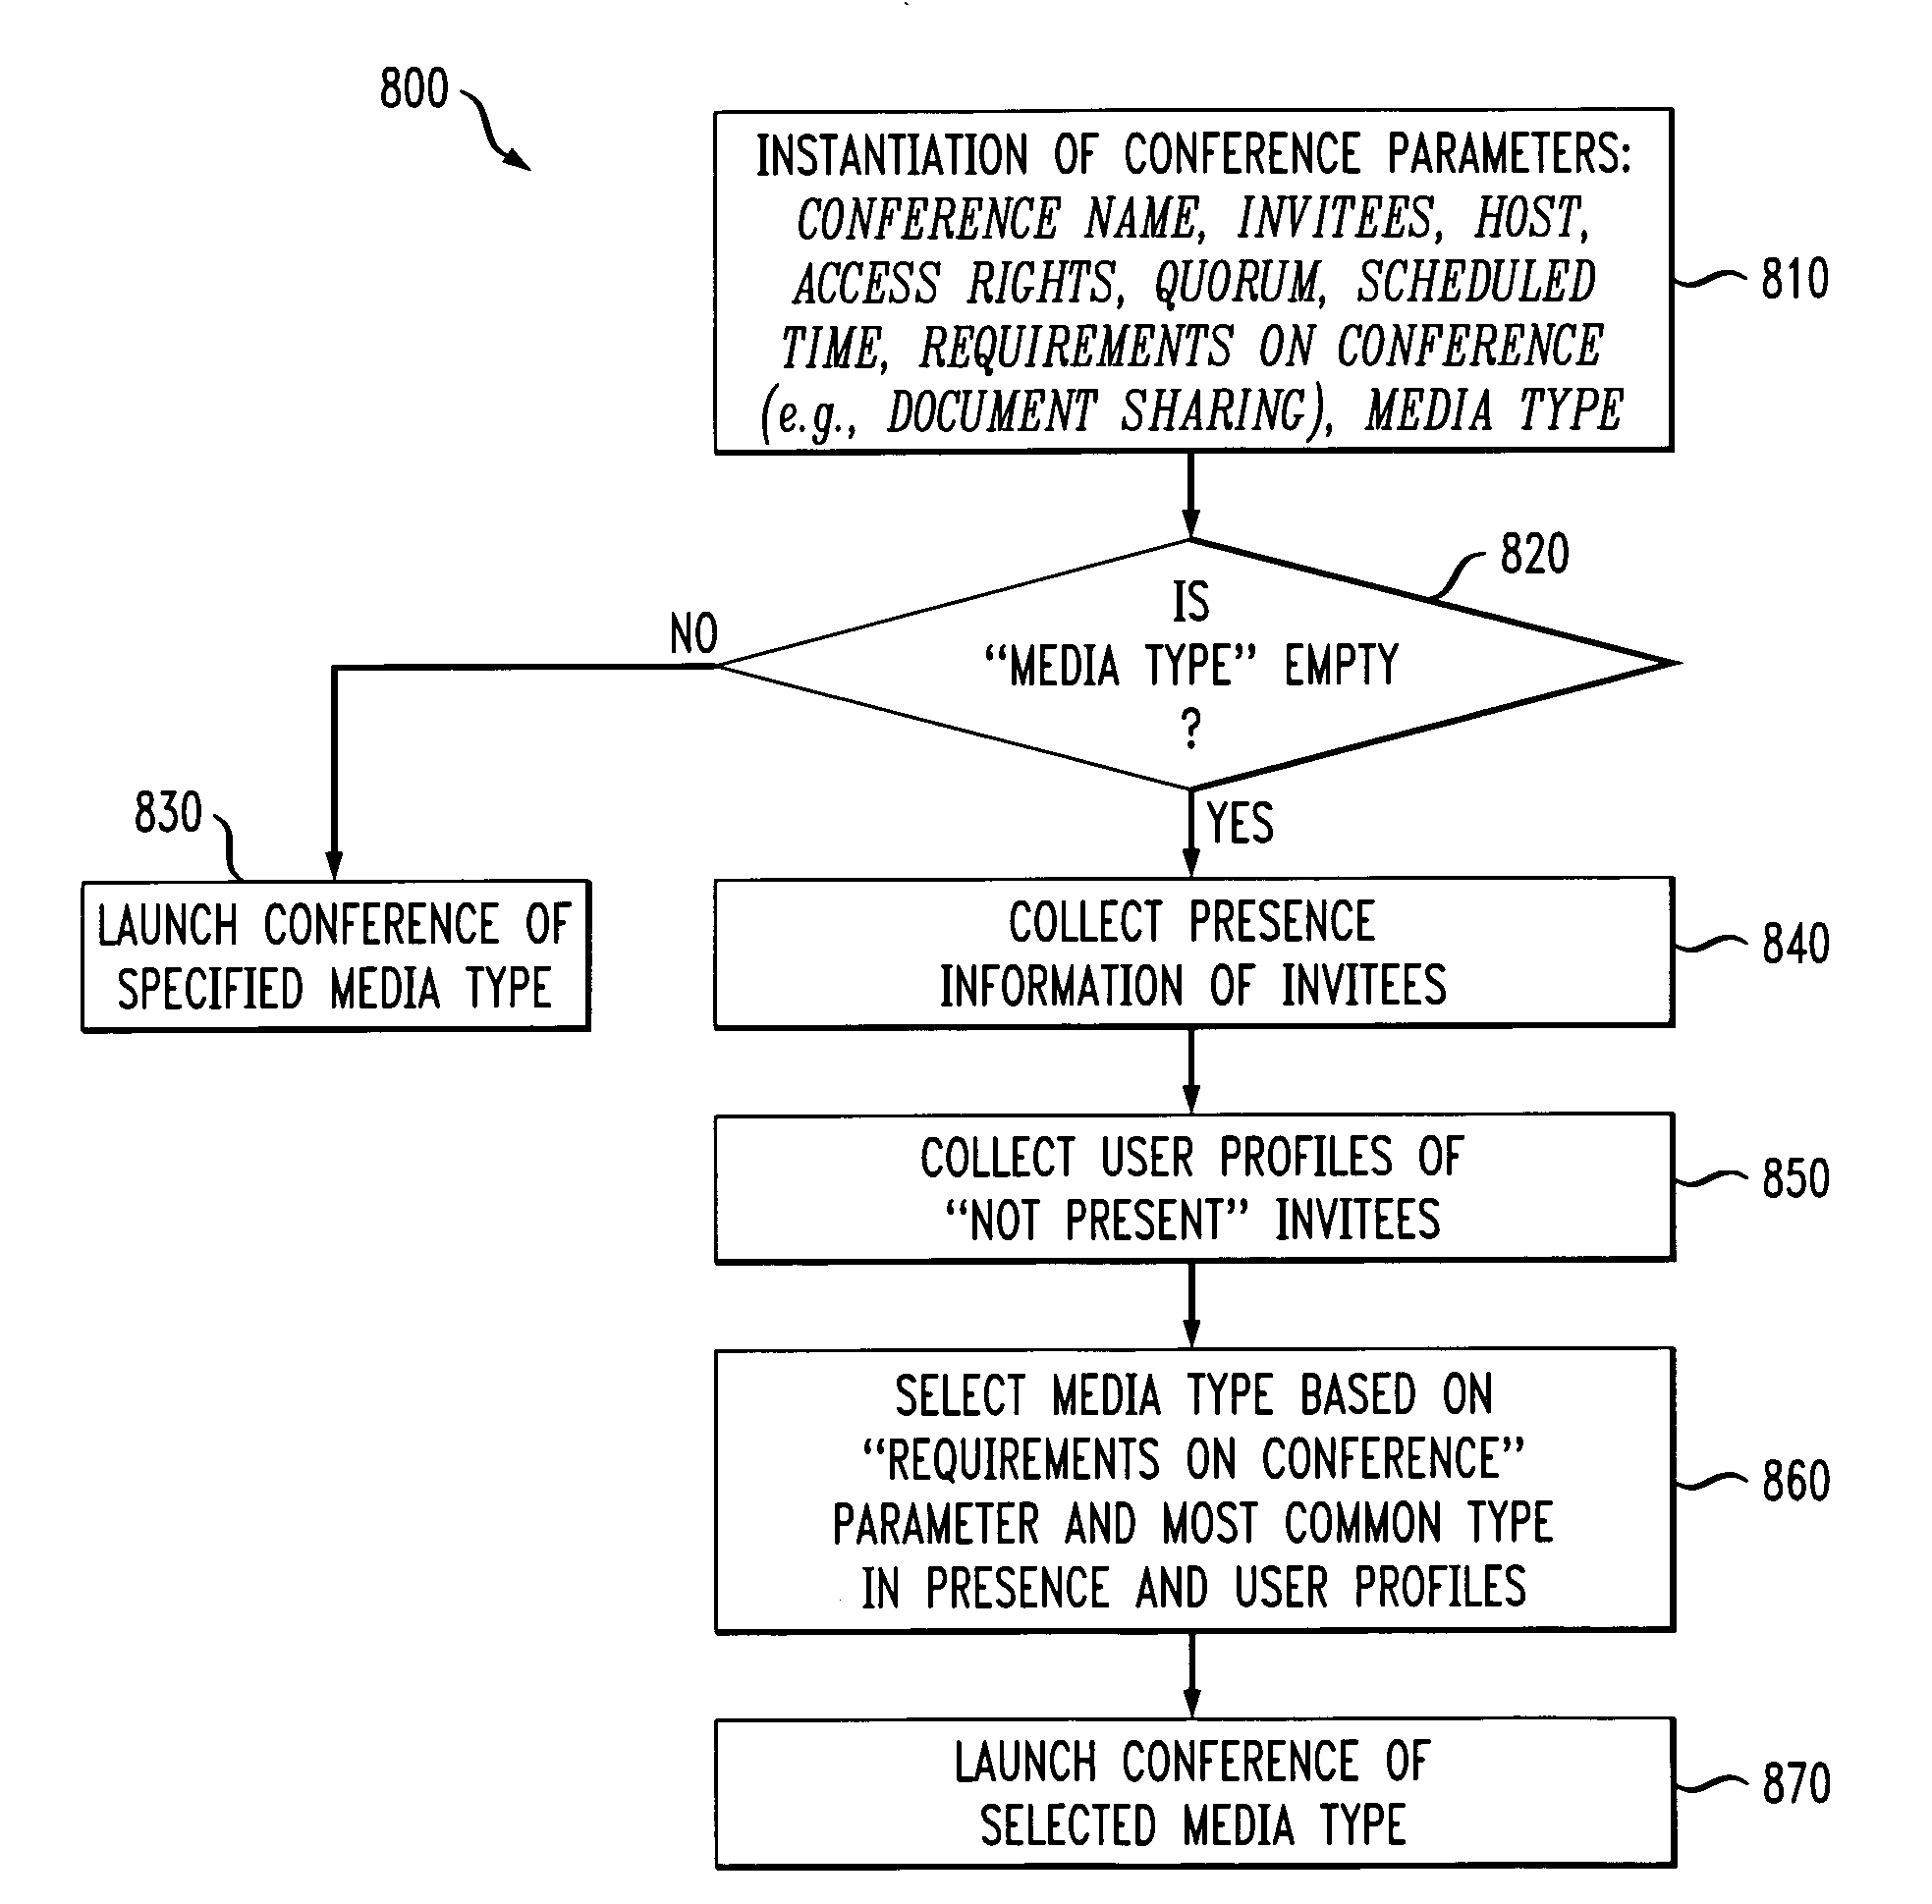 Method and apparatus for launching a conference based on presence of invitees